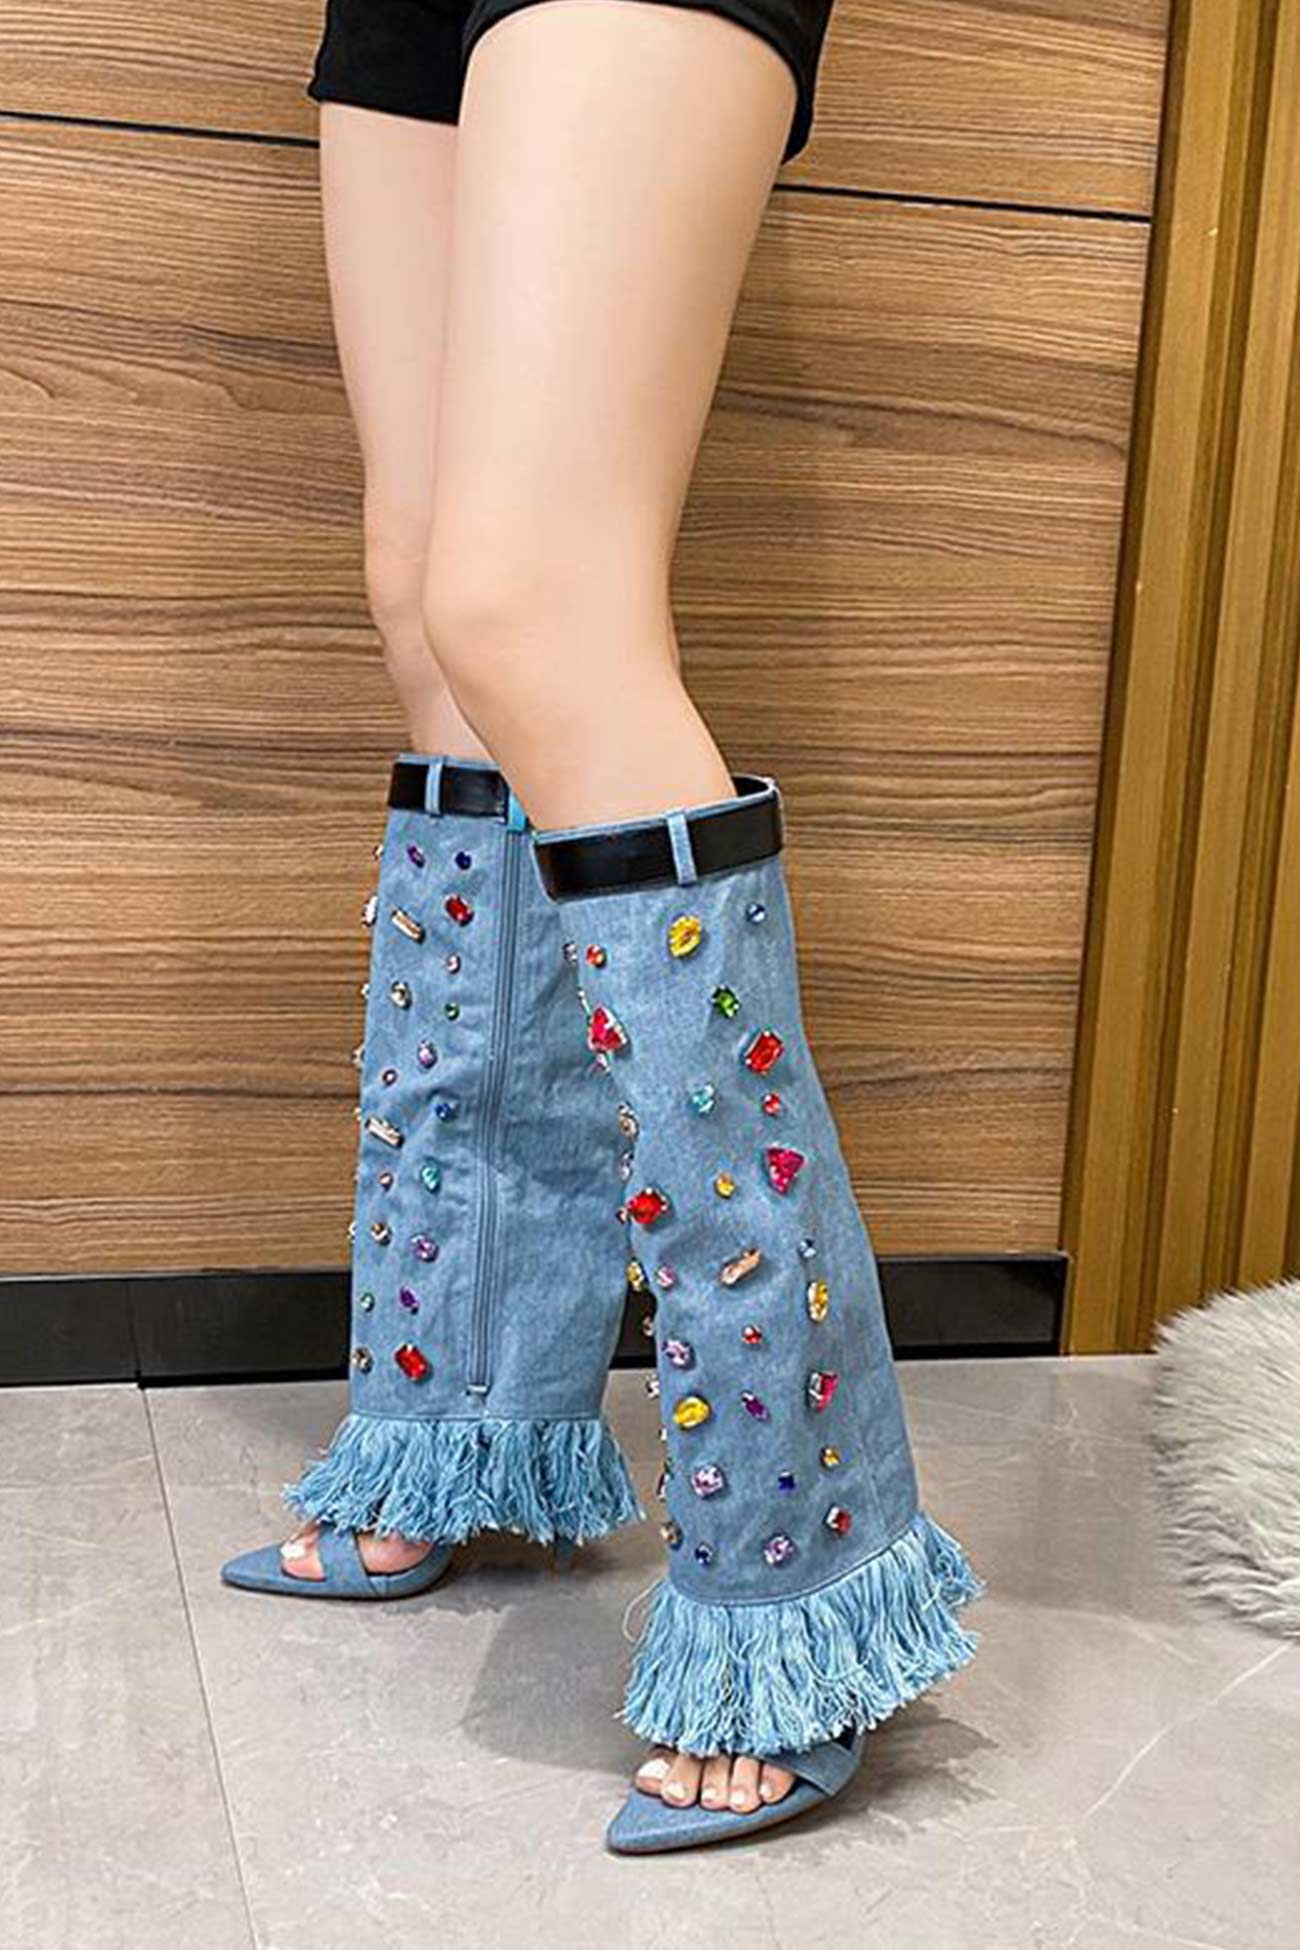 CBGELRT Over the Knee Boots for Women Retro Fashion Jeans Thigh High Boots  High Heel Open Toe Pull on Long Boots Street Party Shoes, 38 - Walmart.com